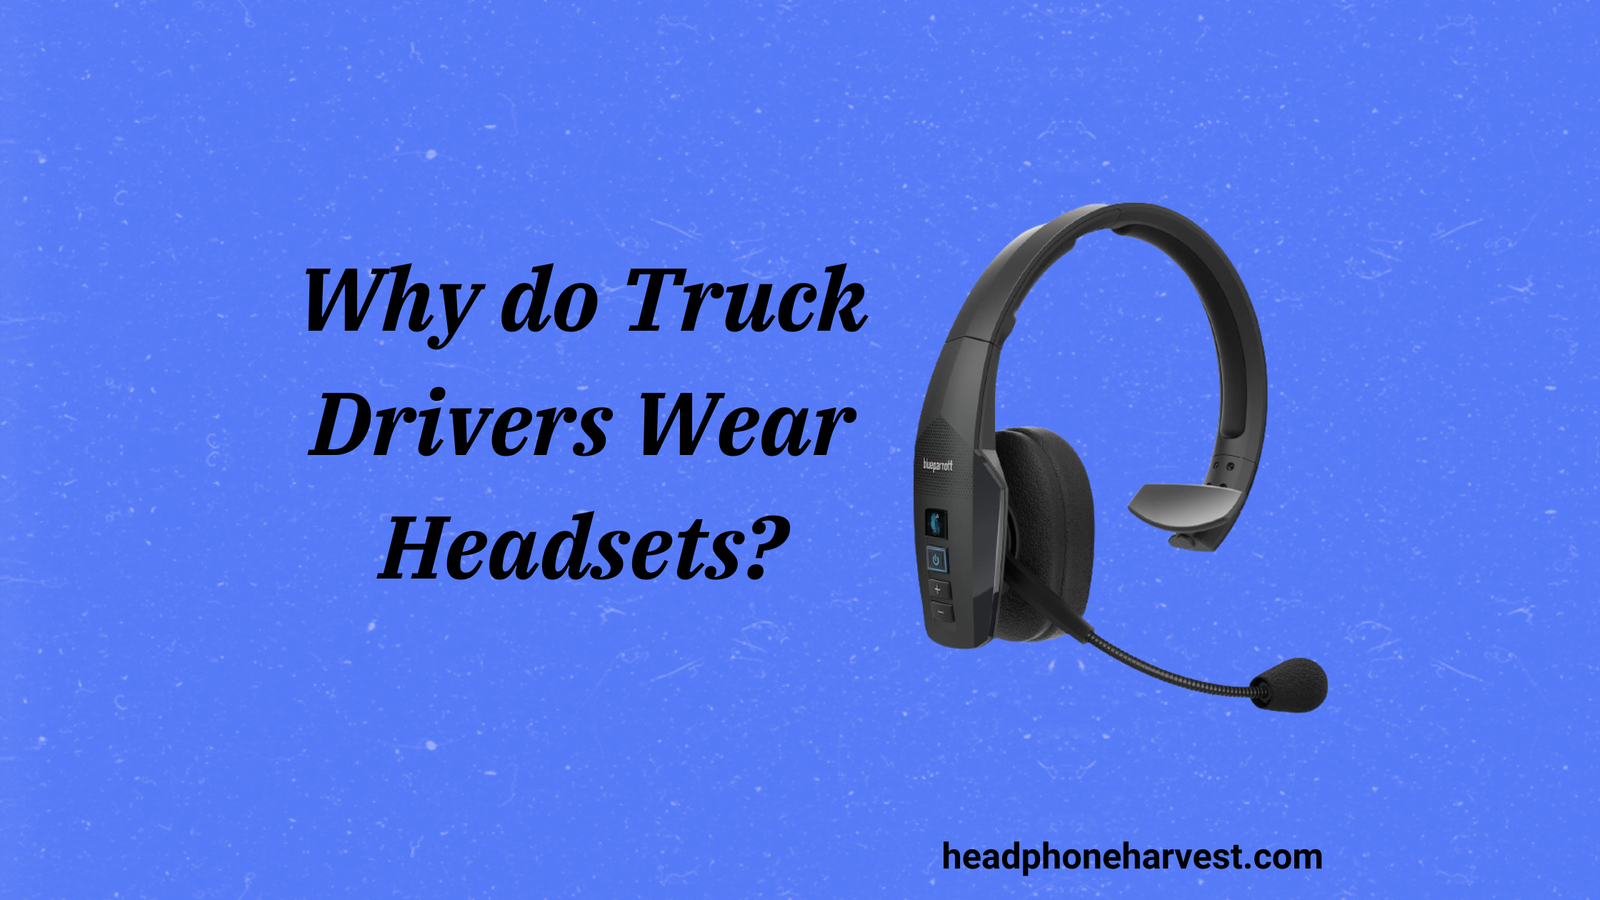 Why do Truck Drivers Wear Headsets